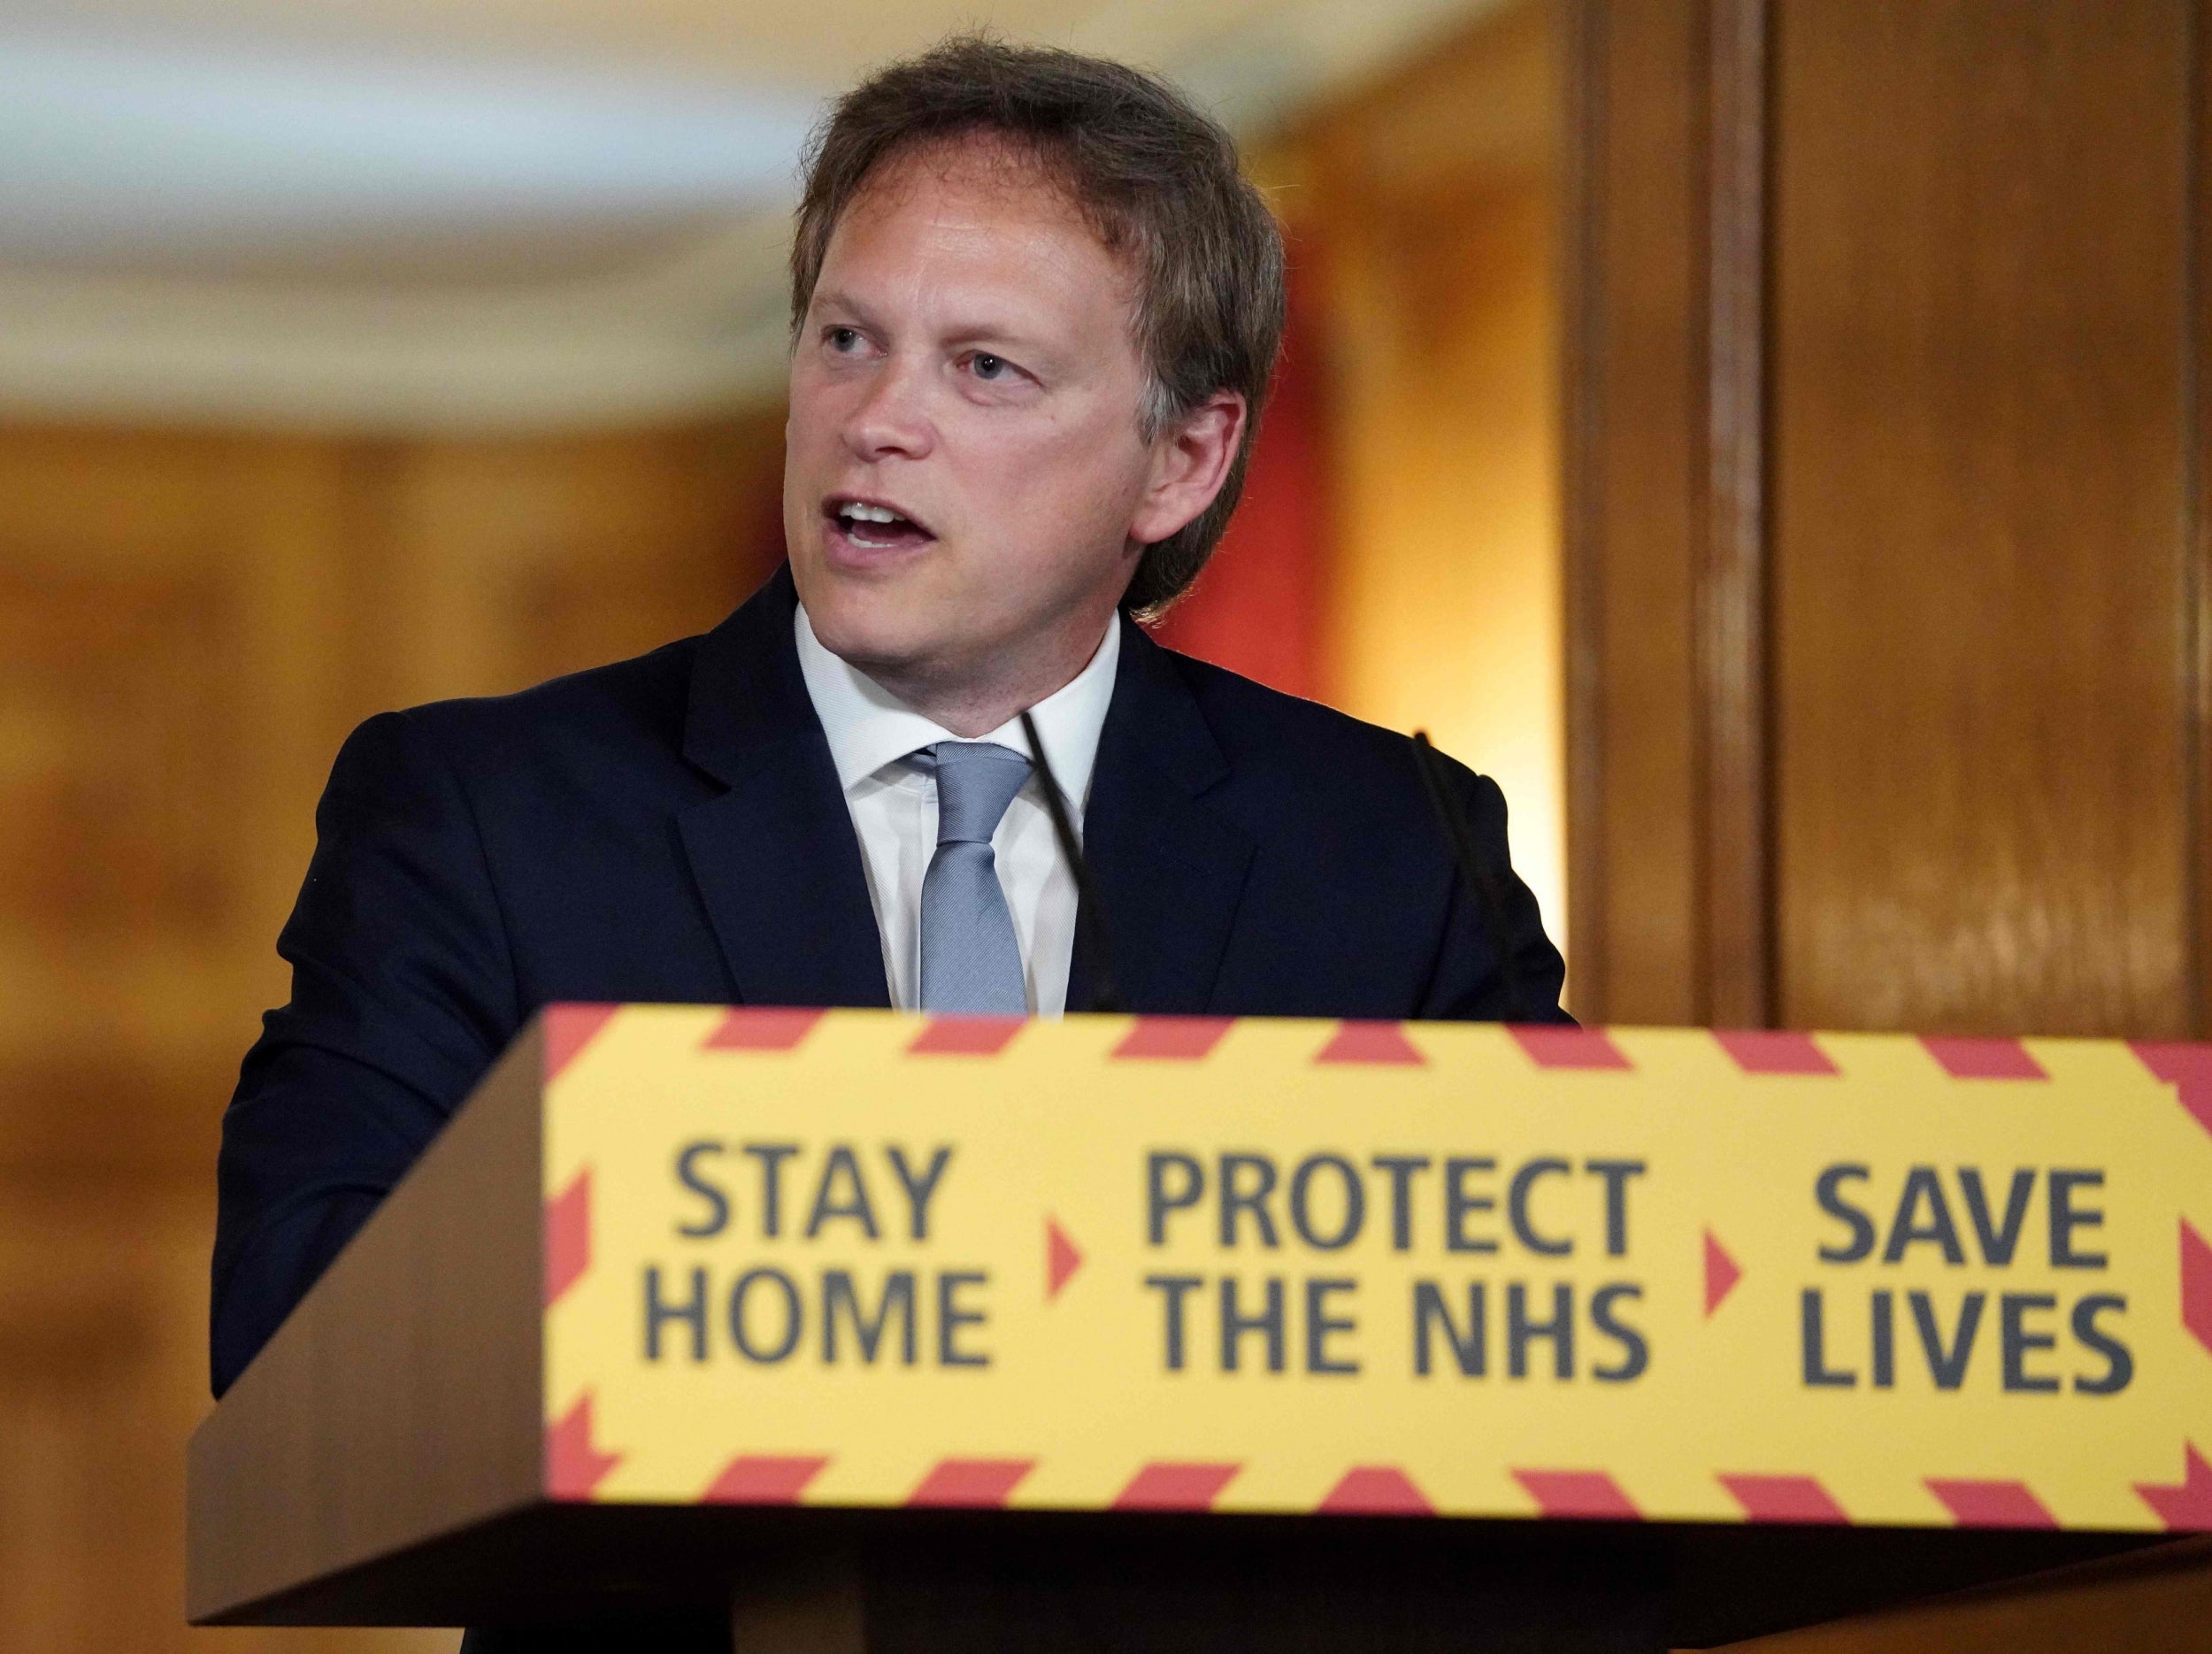 Coronavirus: Transport system will be reduced to just 10% capacity when full services resume due to social distancing, Grant Shapps warns